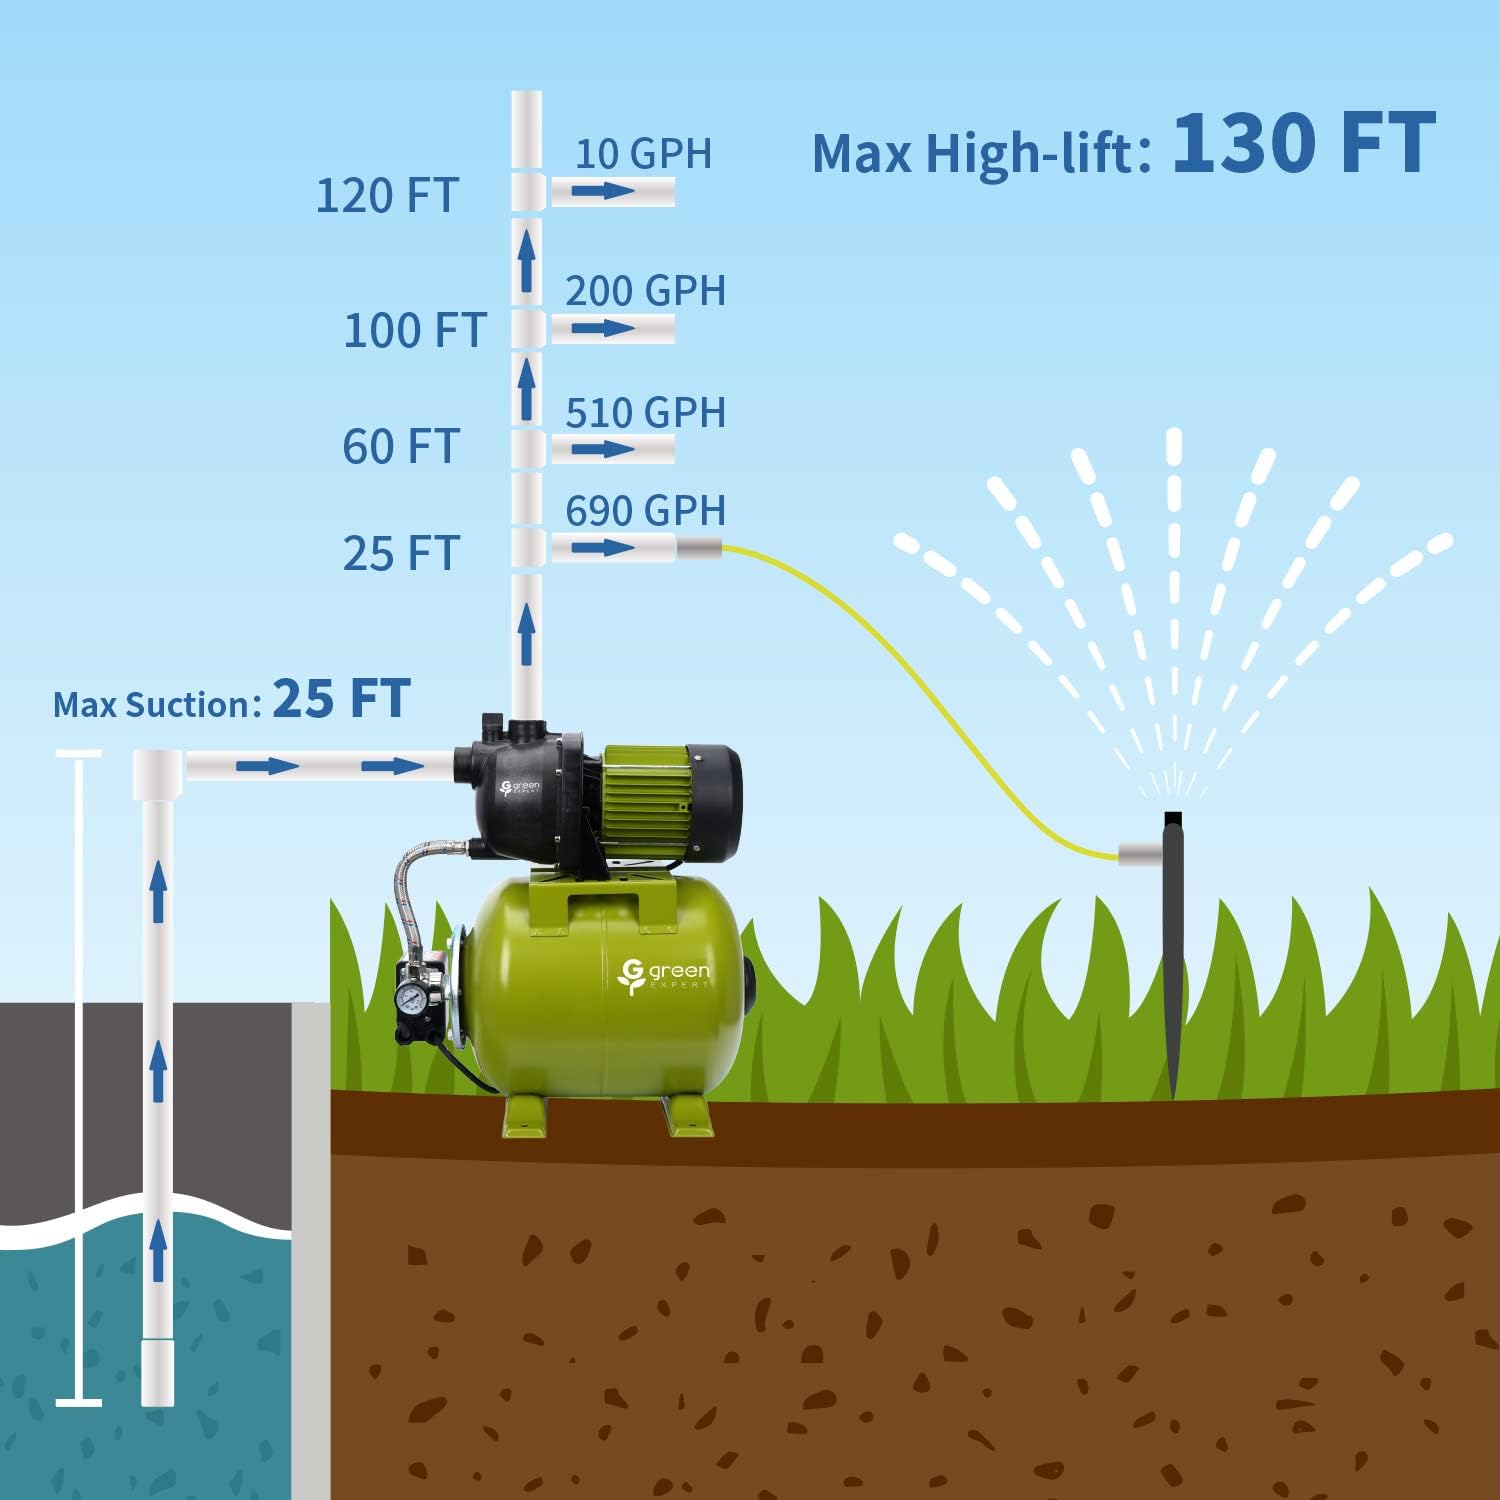 Green Expert 1HP Shallow Well Water Pump Max Head 130FT Max Flow 800GPH 5-Gal Pressure Tank Automatic Booster System 17-43 PSI Preset Switch for Household Pipe Pressurization Lawn Garden Irrigation